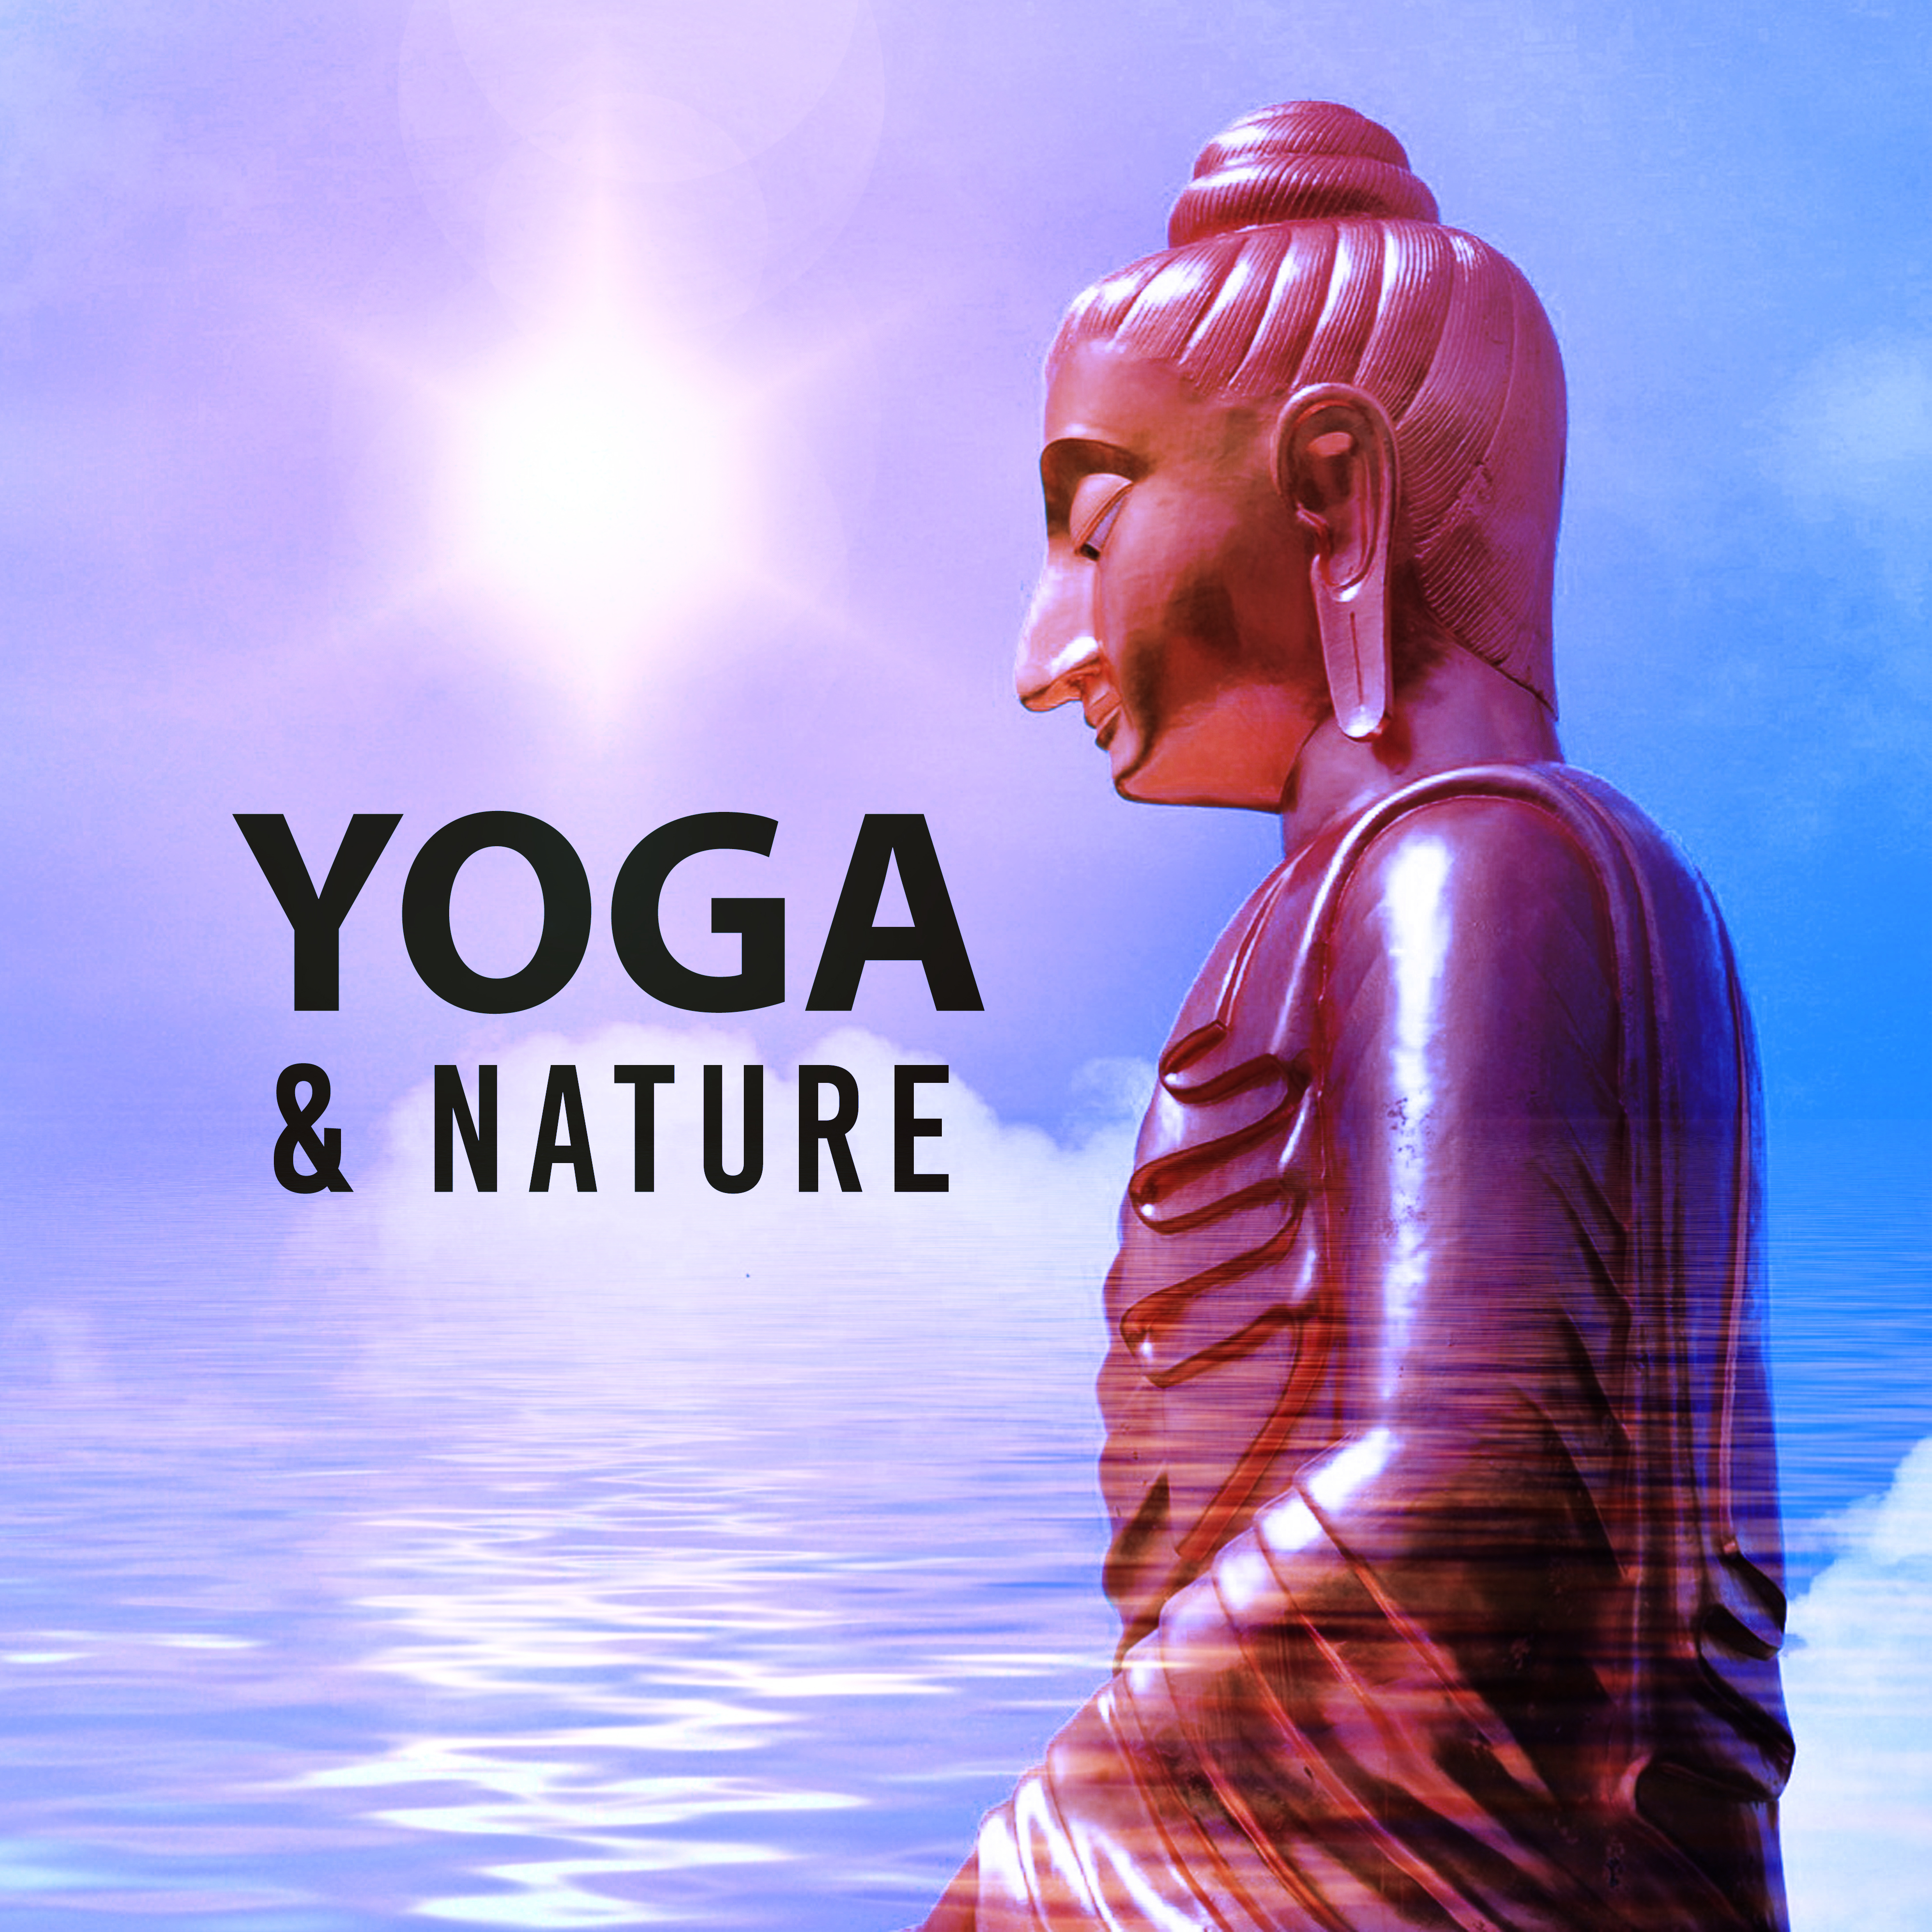 Yoga & Nature – Healing Music, New Age Sounds for Meditation, Yoga Training, Zen, Reiki, Stress Relief, Nature Sounds